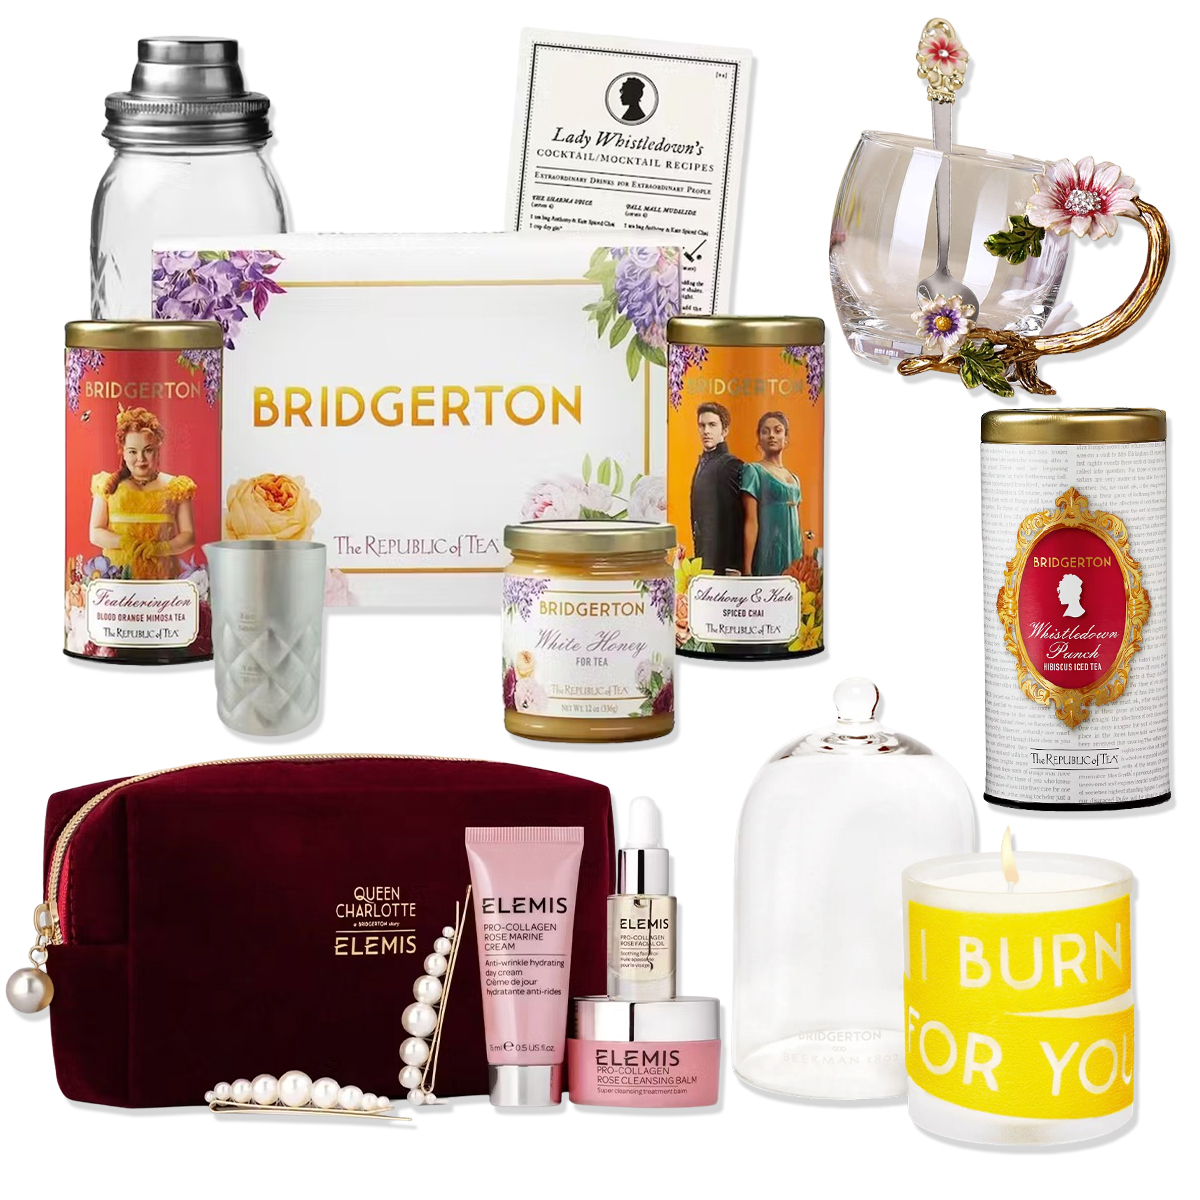 16 Perfect Gifts For the Ultimate Bridgerton Fan